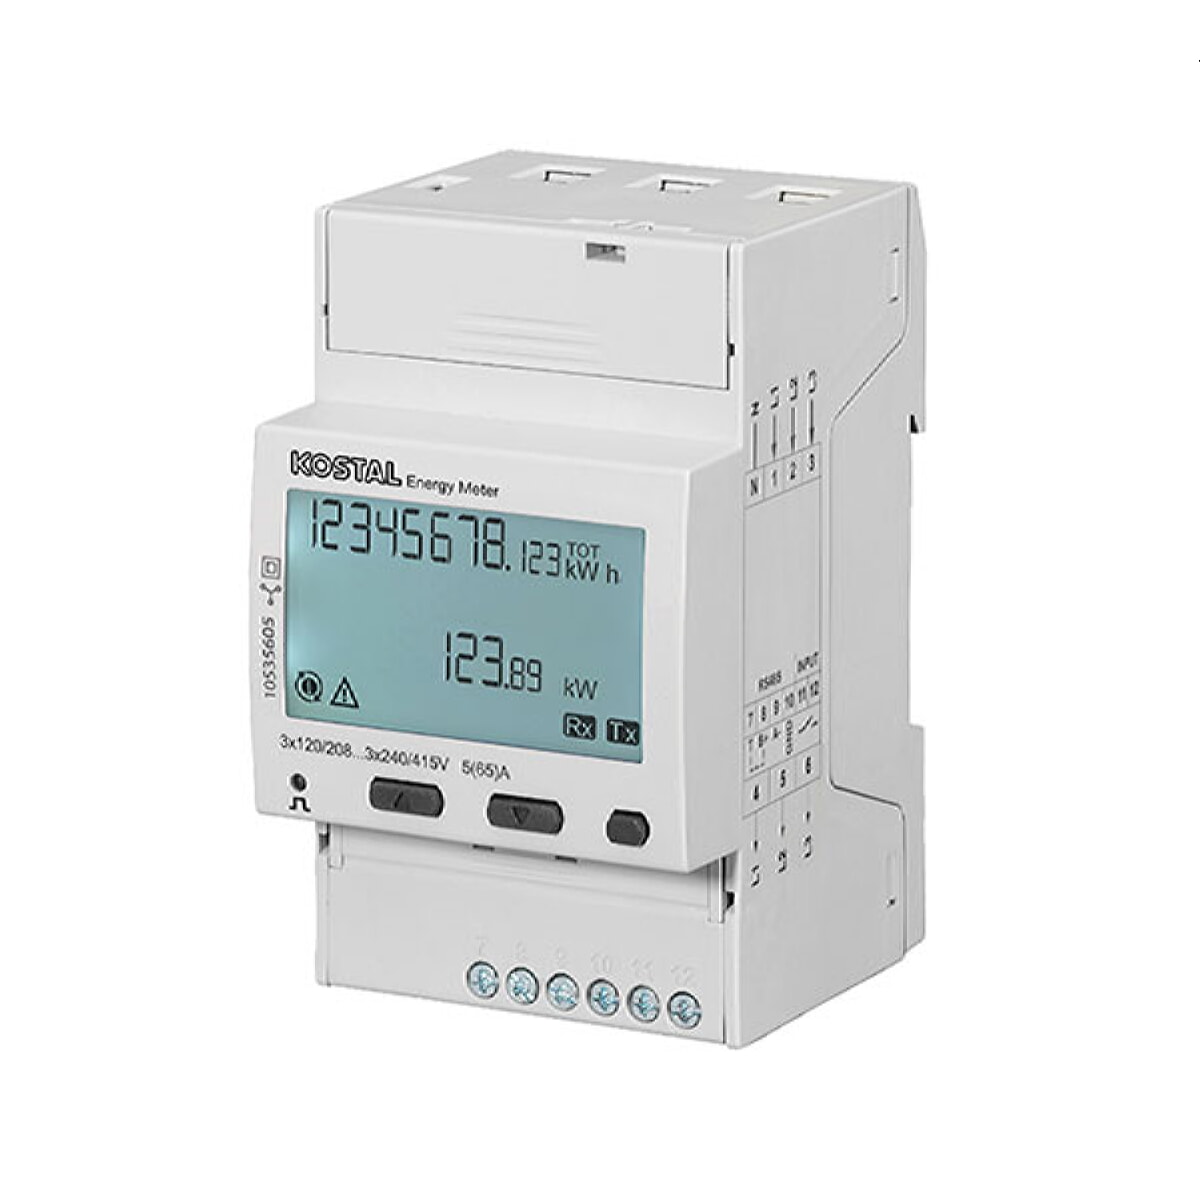 Kostal Energy Meter KEM-C, 3-phase up to 63A